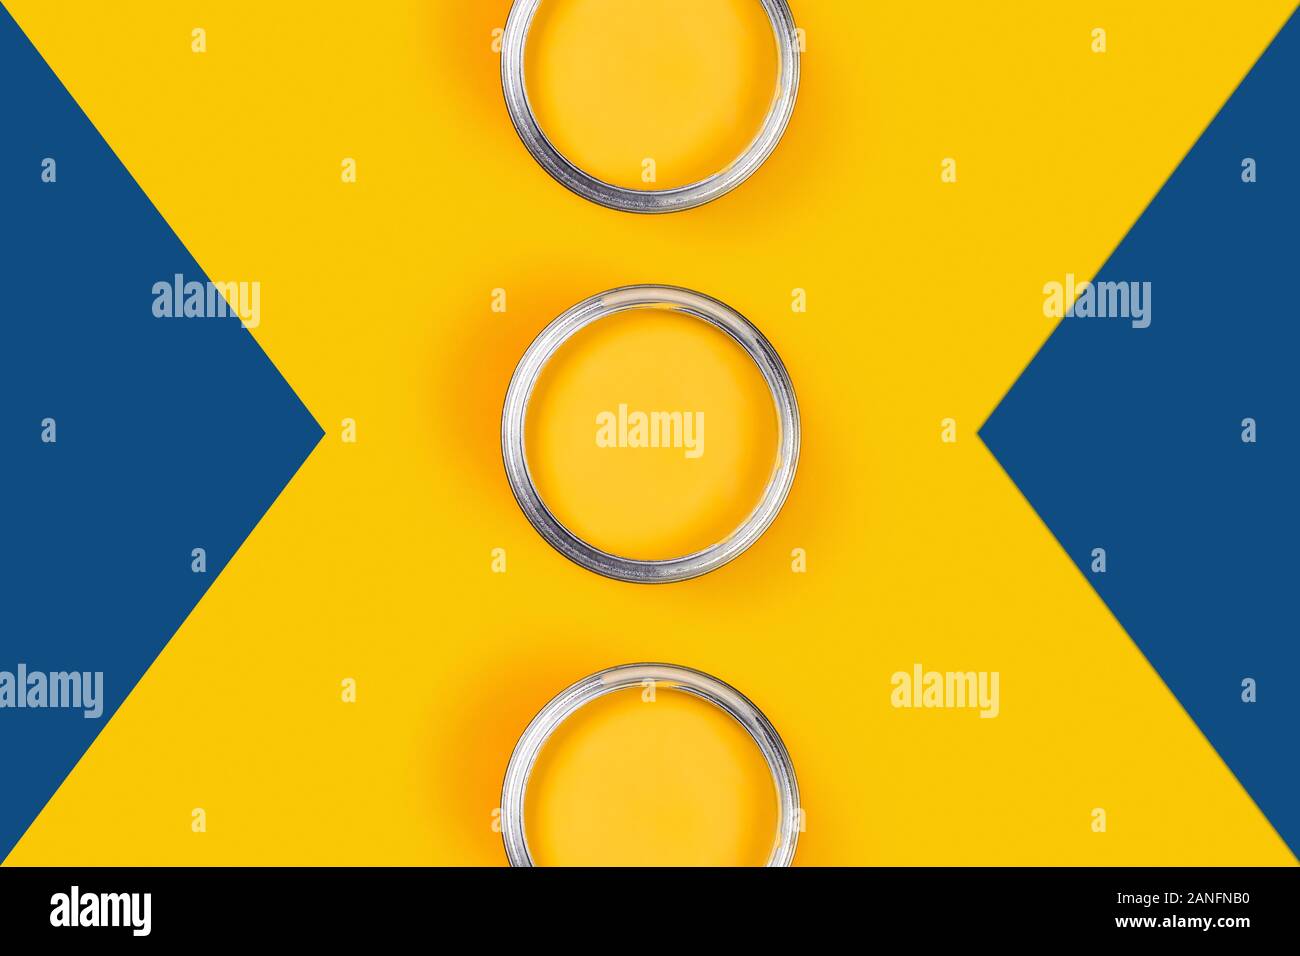 Repair picture. Classic blue and yellow background with three yellow paint cans. Flat lay, top view, copy space. Stock Photo